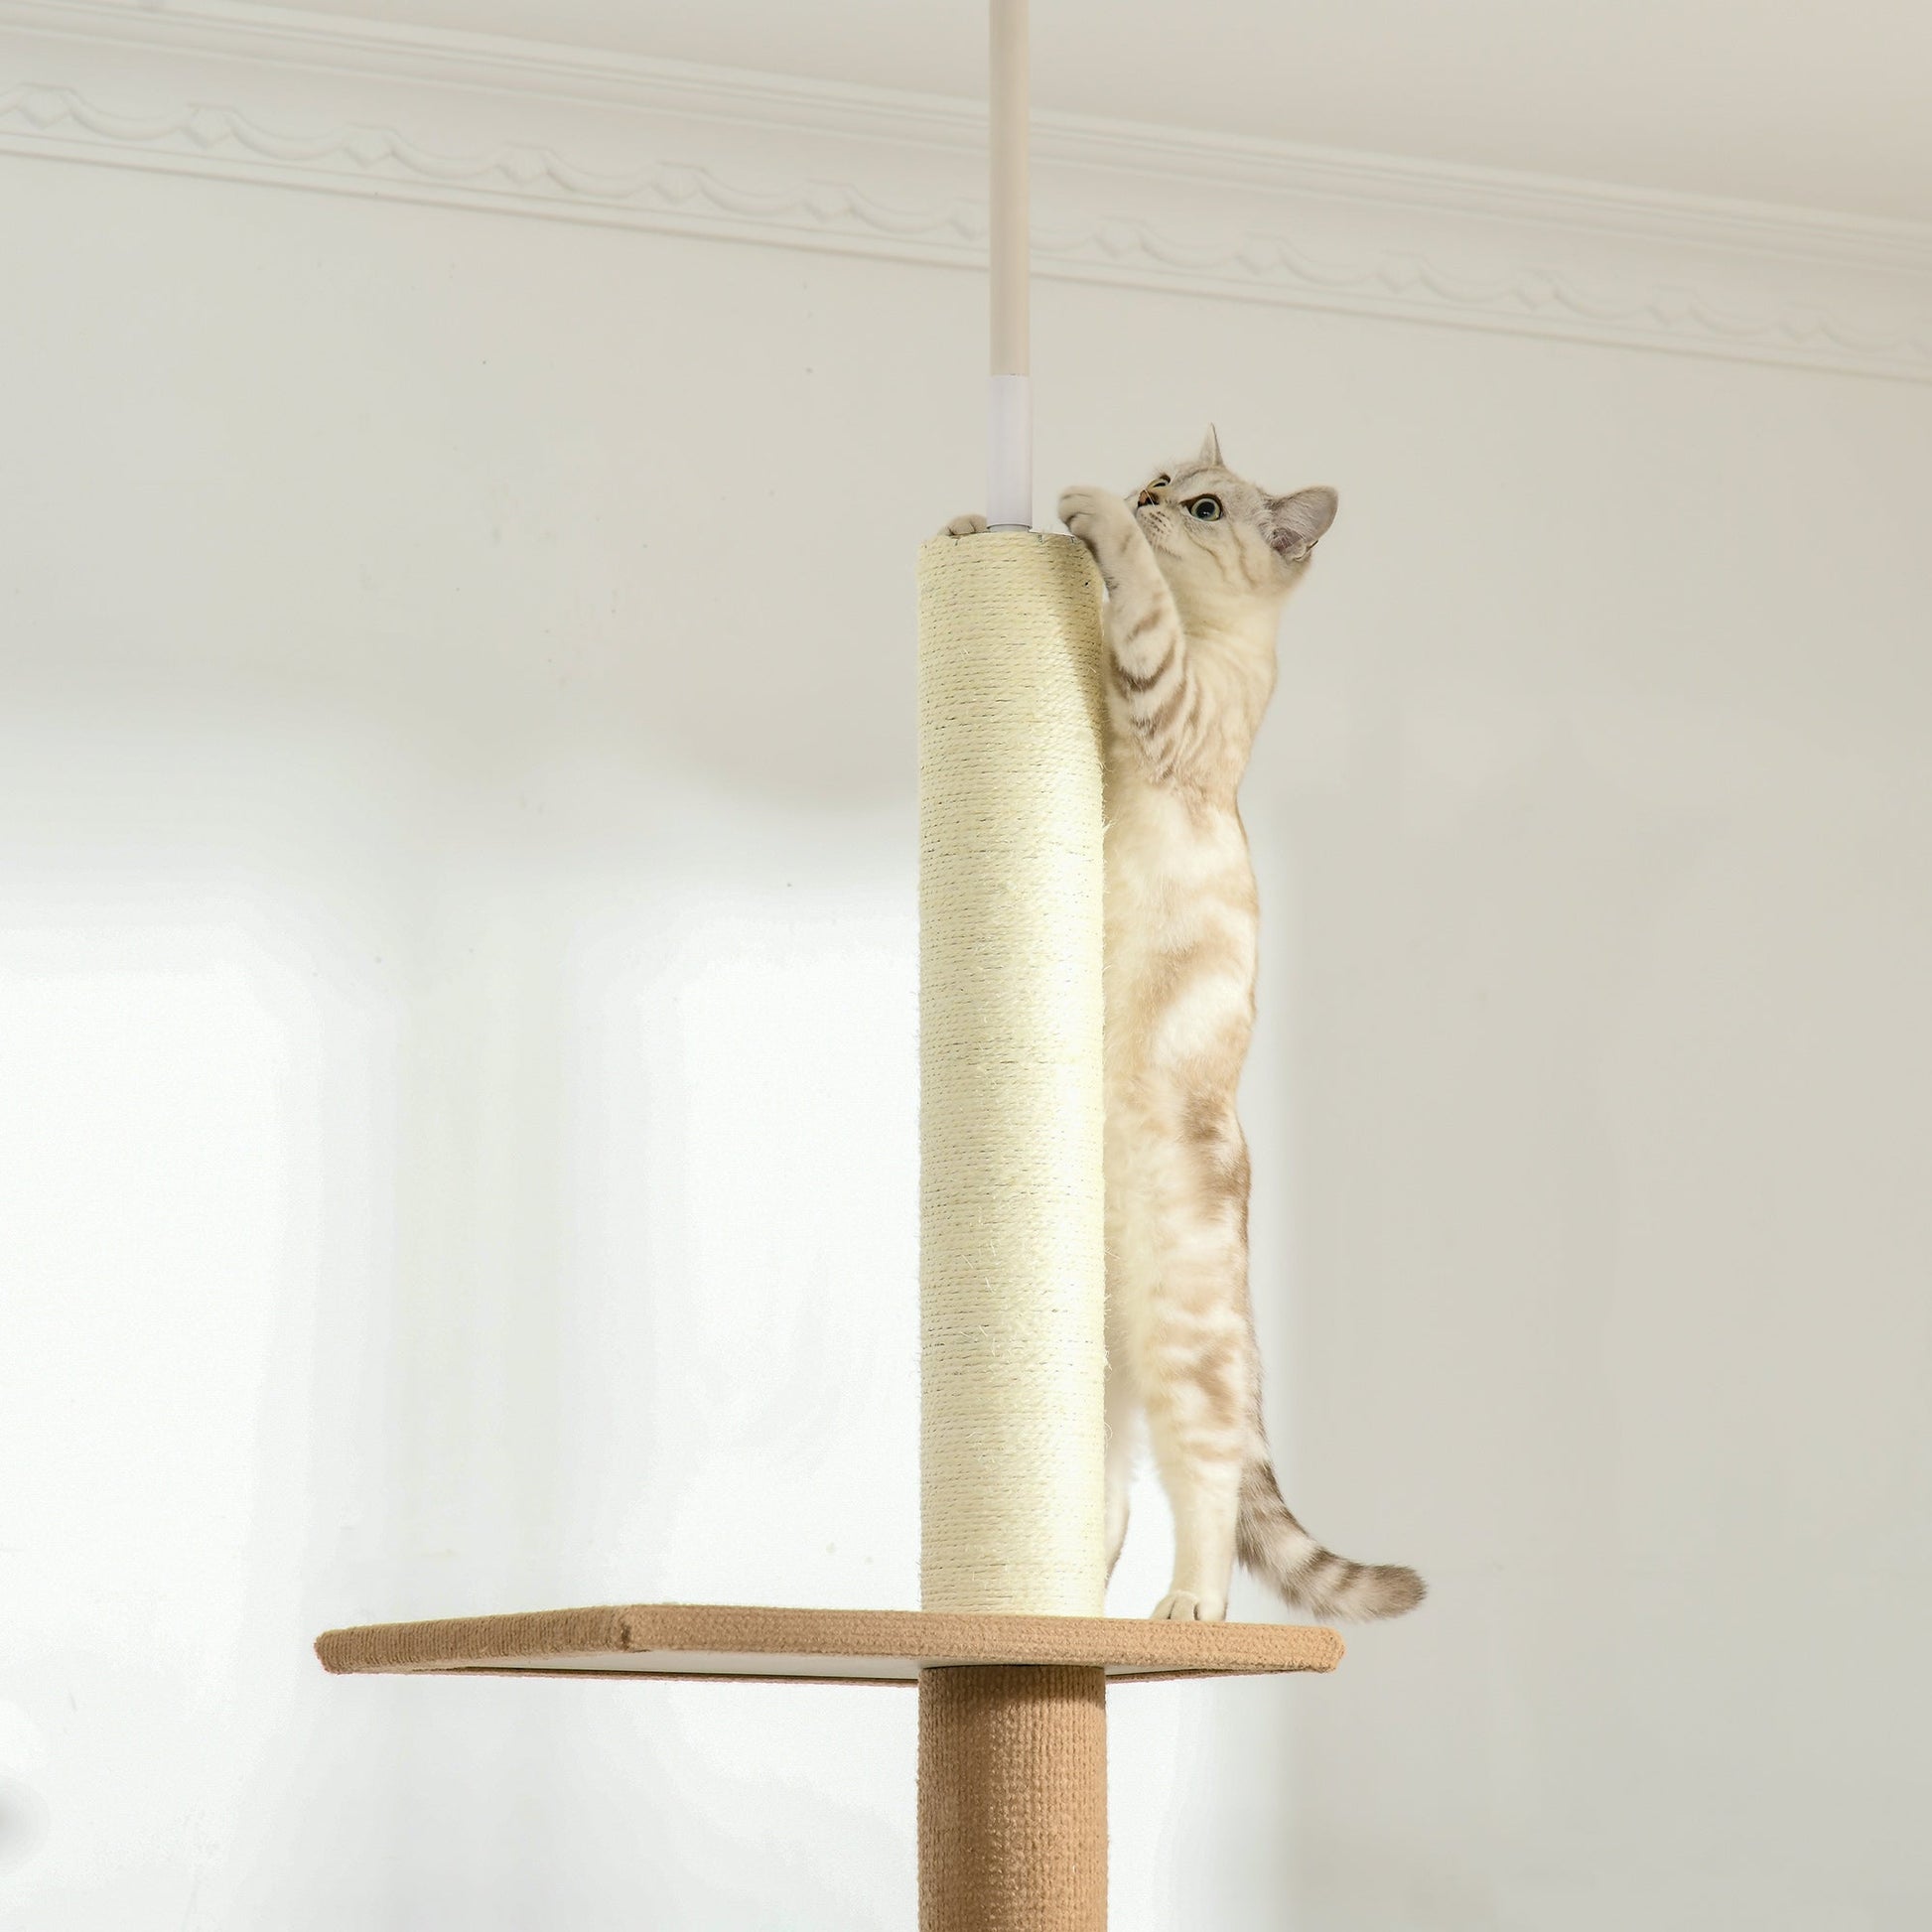 100" Floor To Ceiling Cat Tree w/ 3 Perches Activity Center for Kittens Cat Tower Furniture, Brown - Gallery Canada